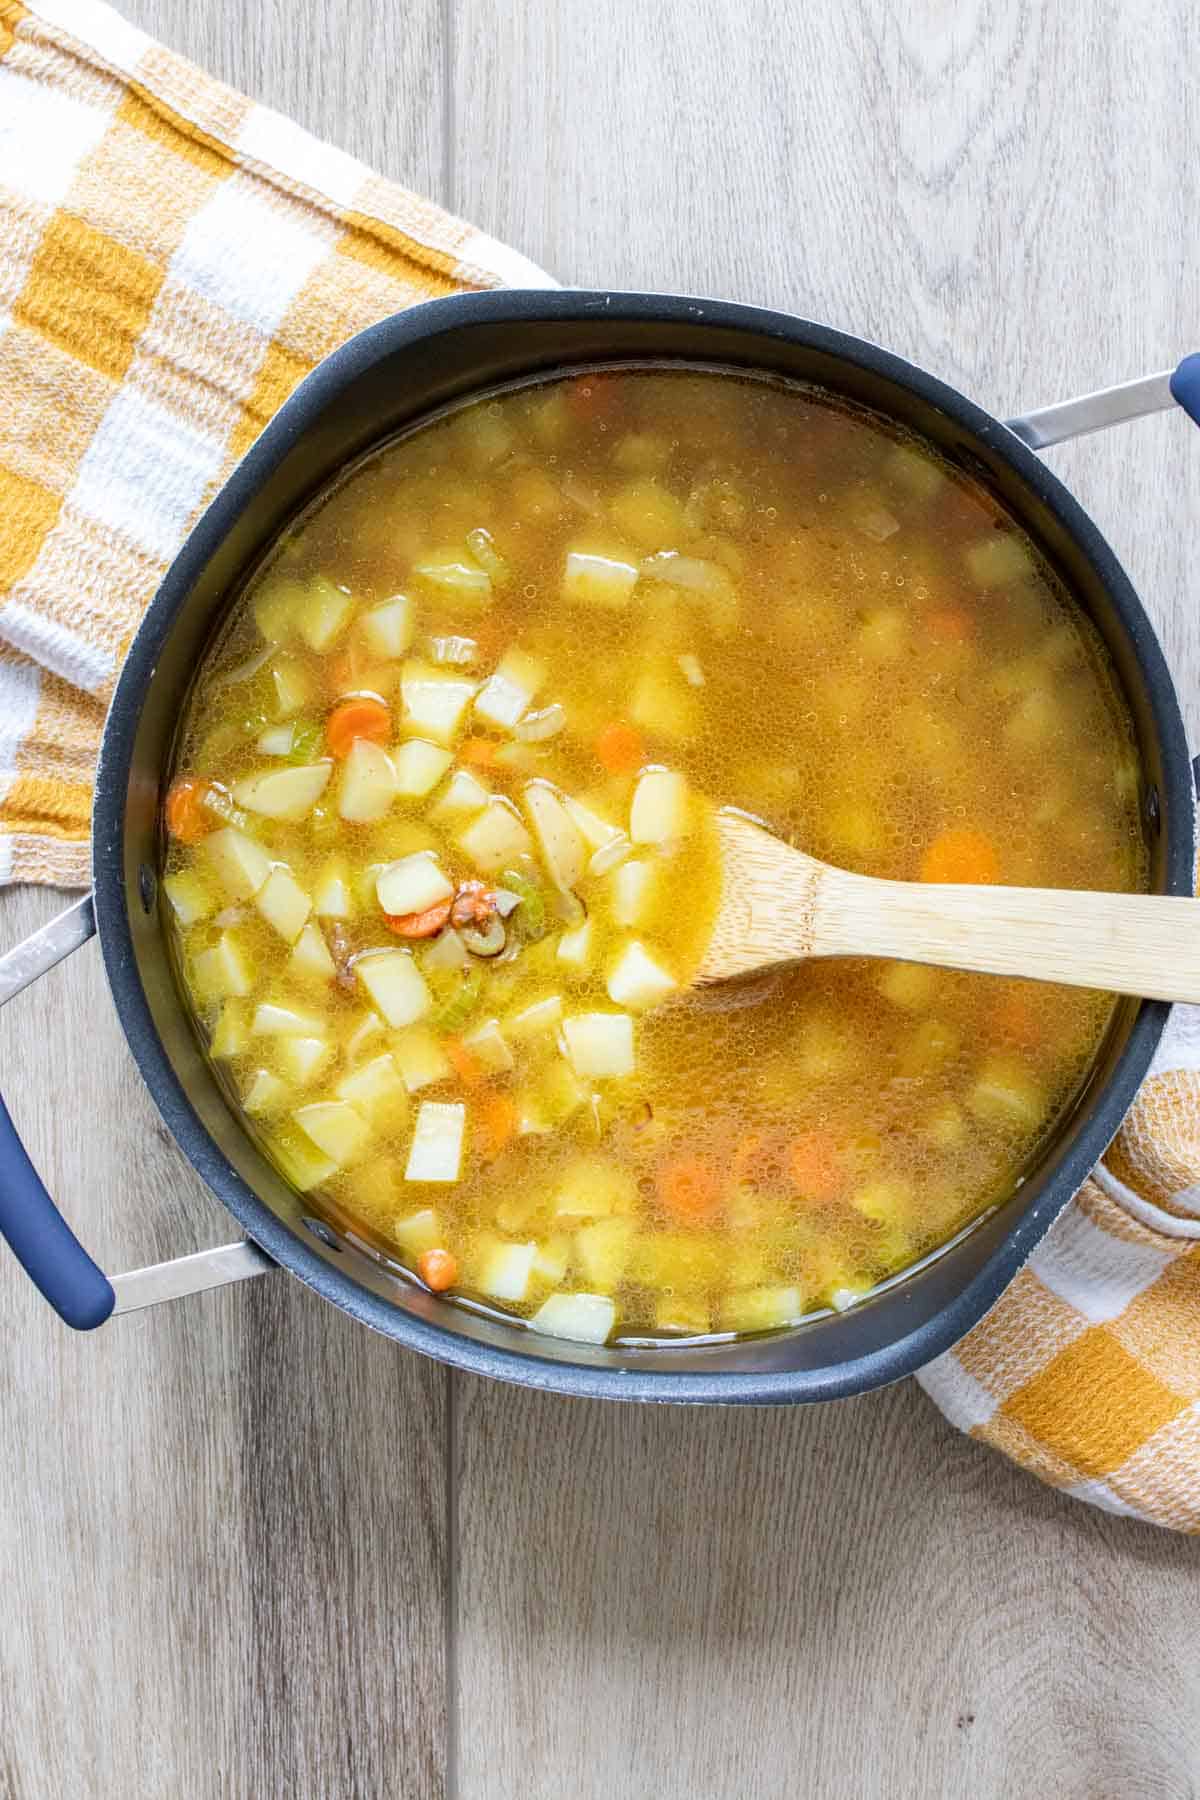 Pot filled with broth, chopped potatoes and carrots with a wooden spoon